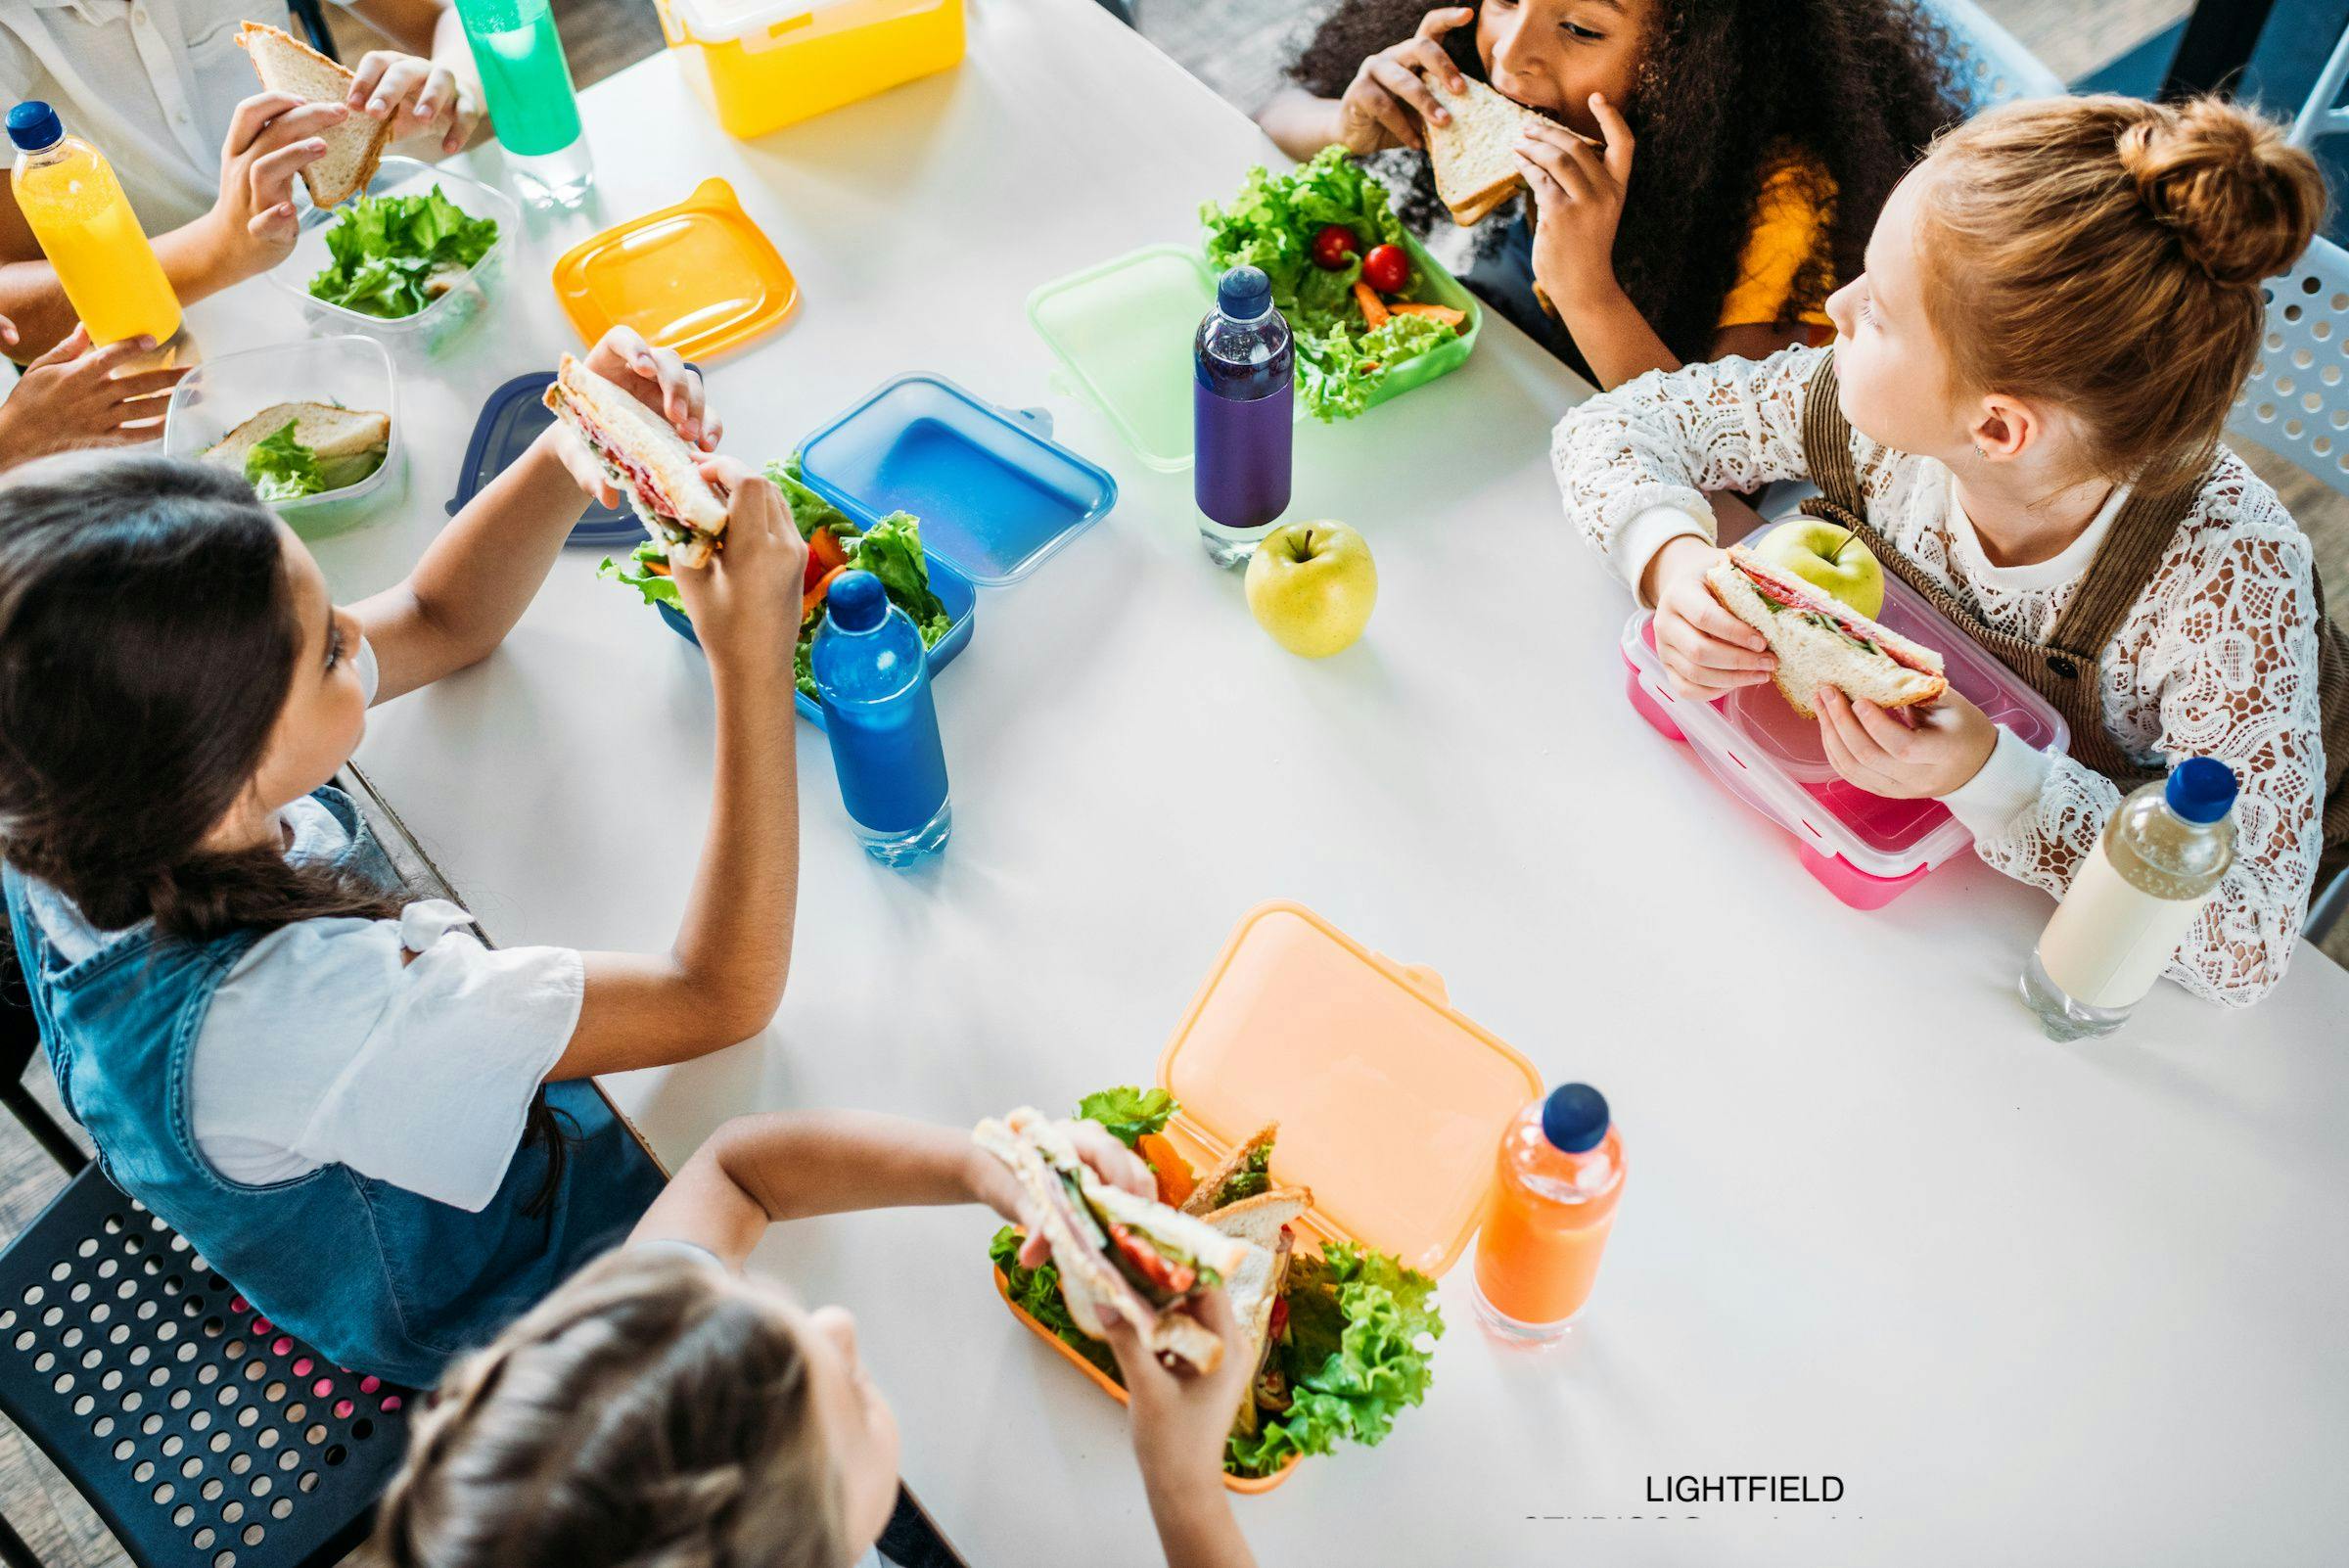 Longer lunch periods could improve nutrition